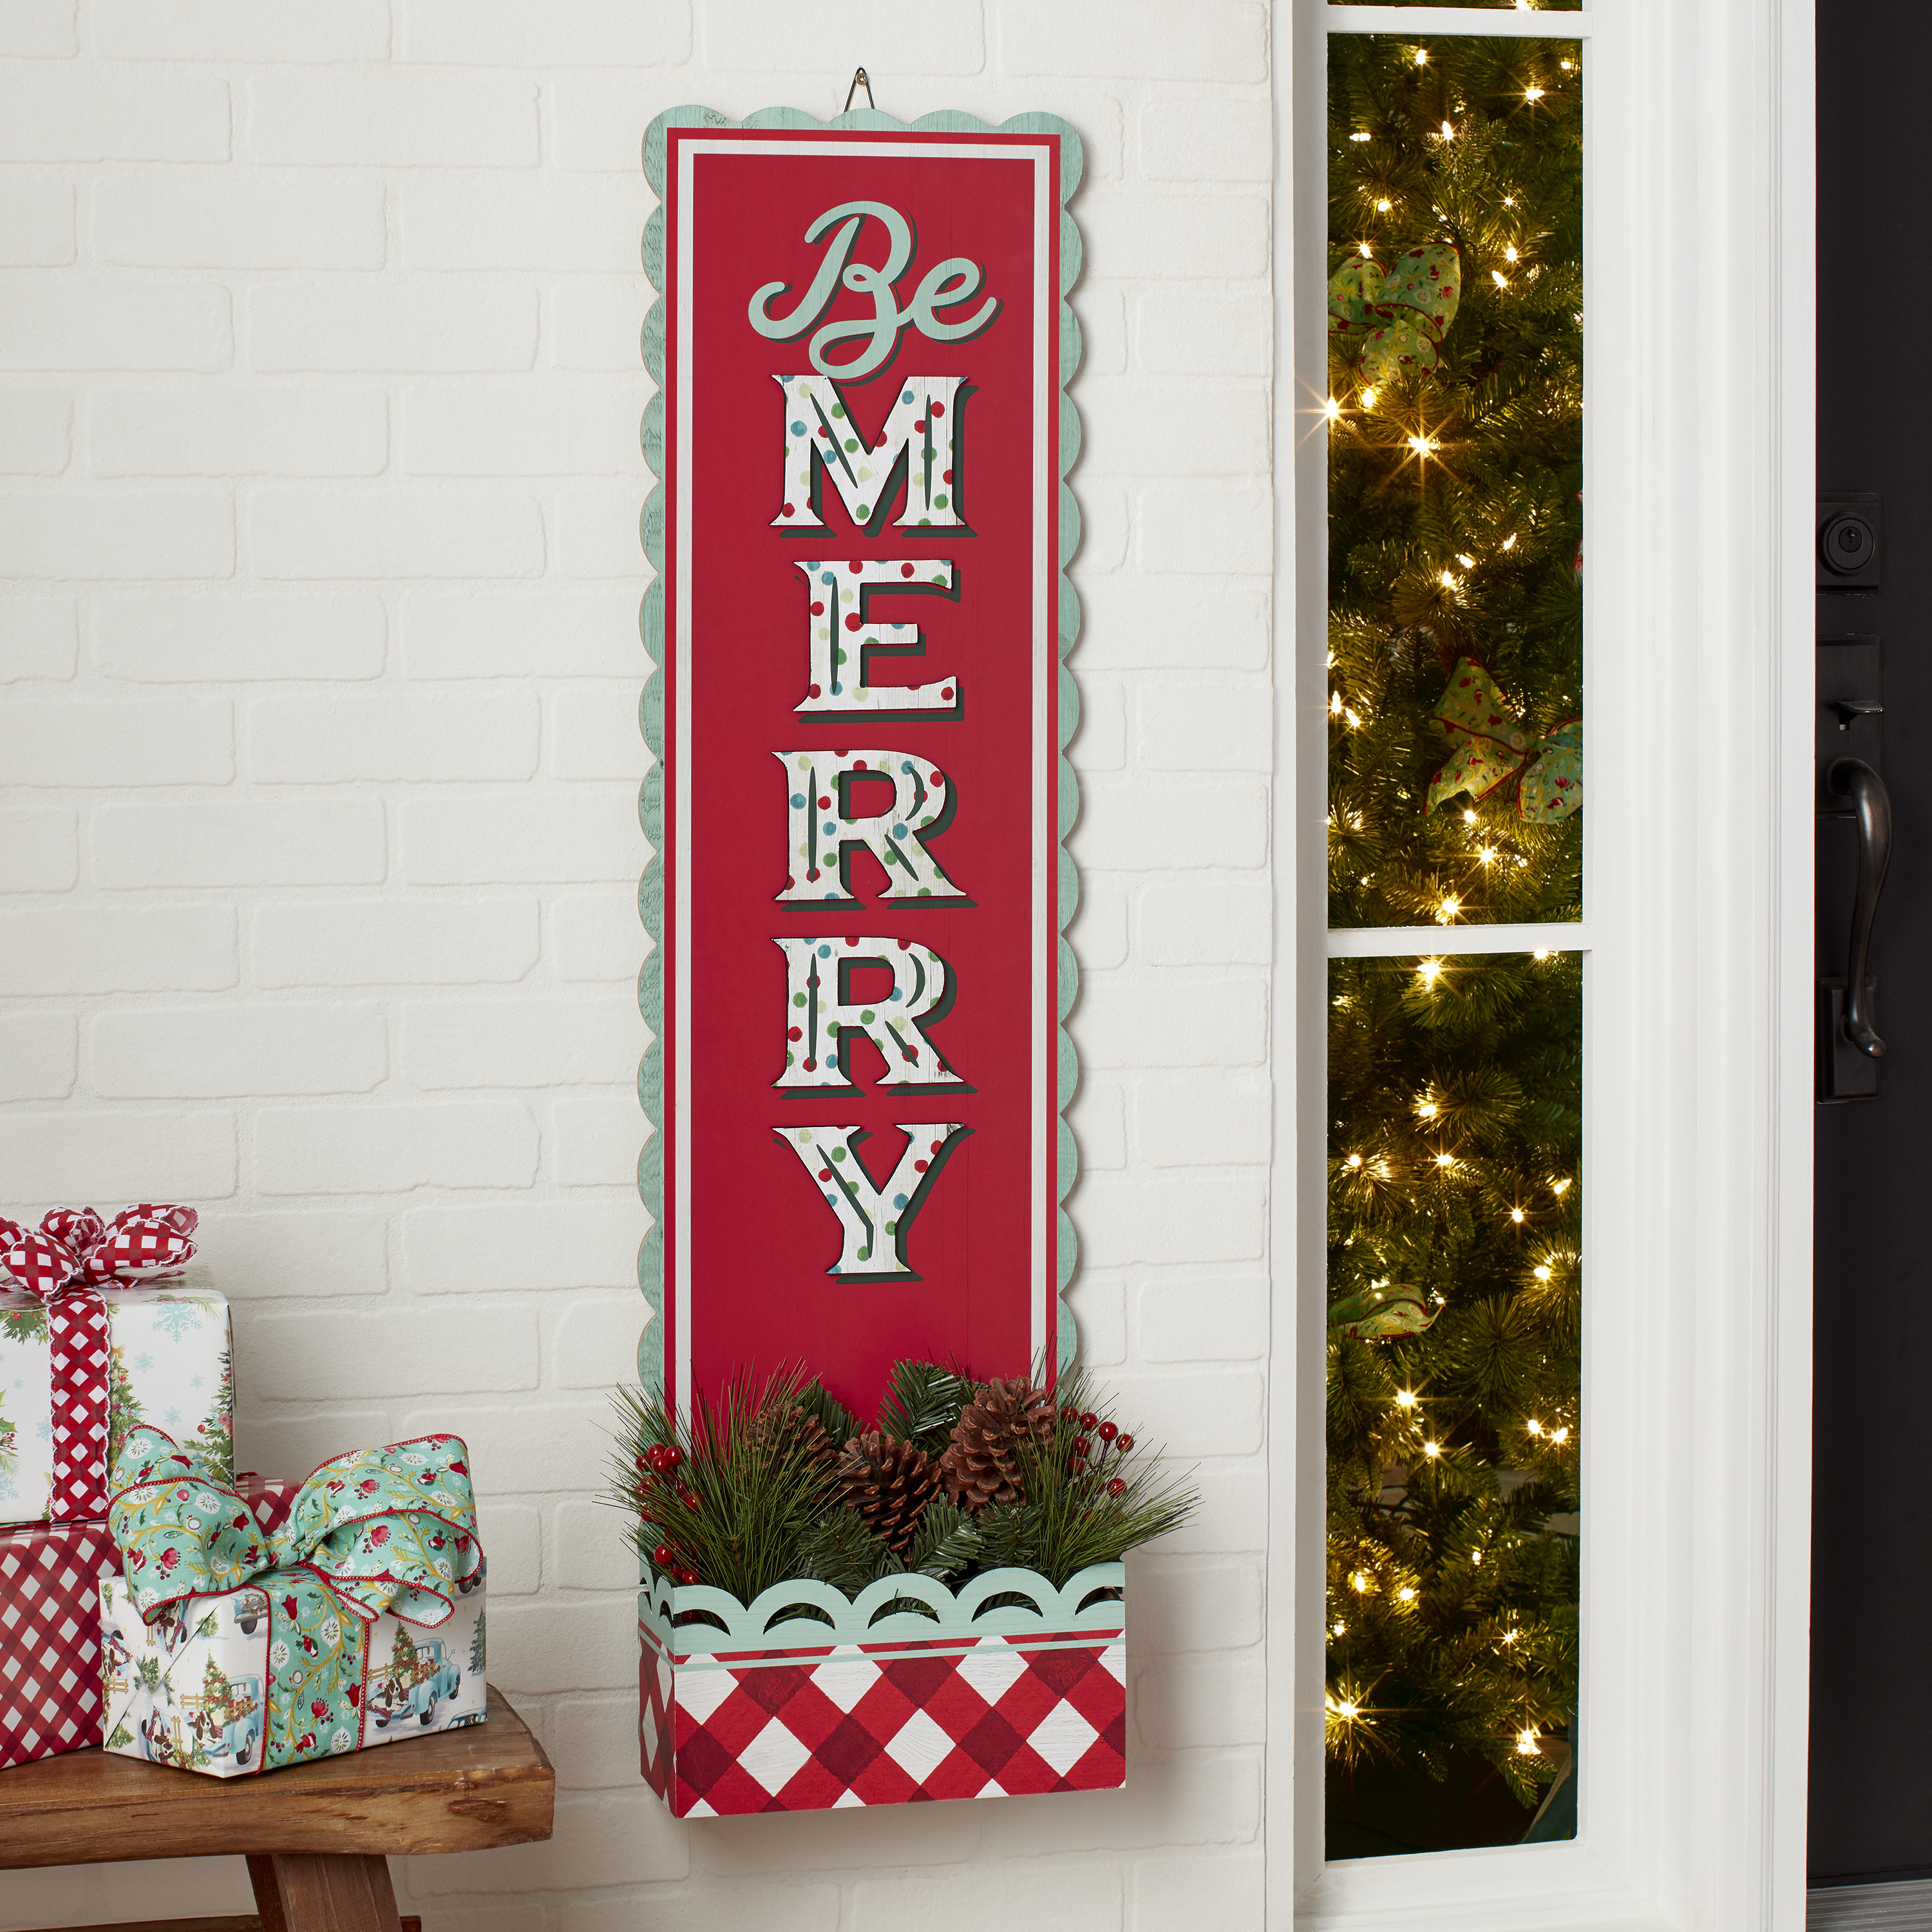 The Pioneer Woman Porch Sign, Be Merry - image 2 of 5